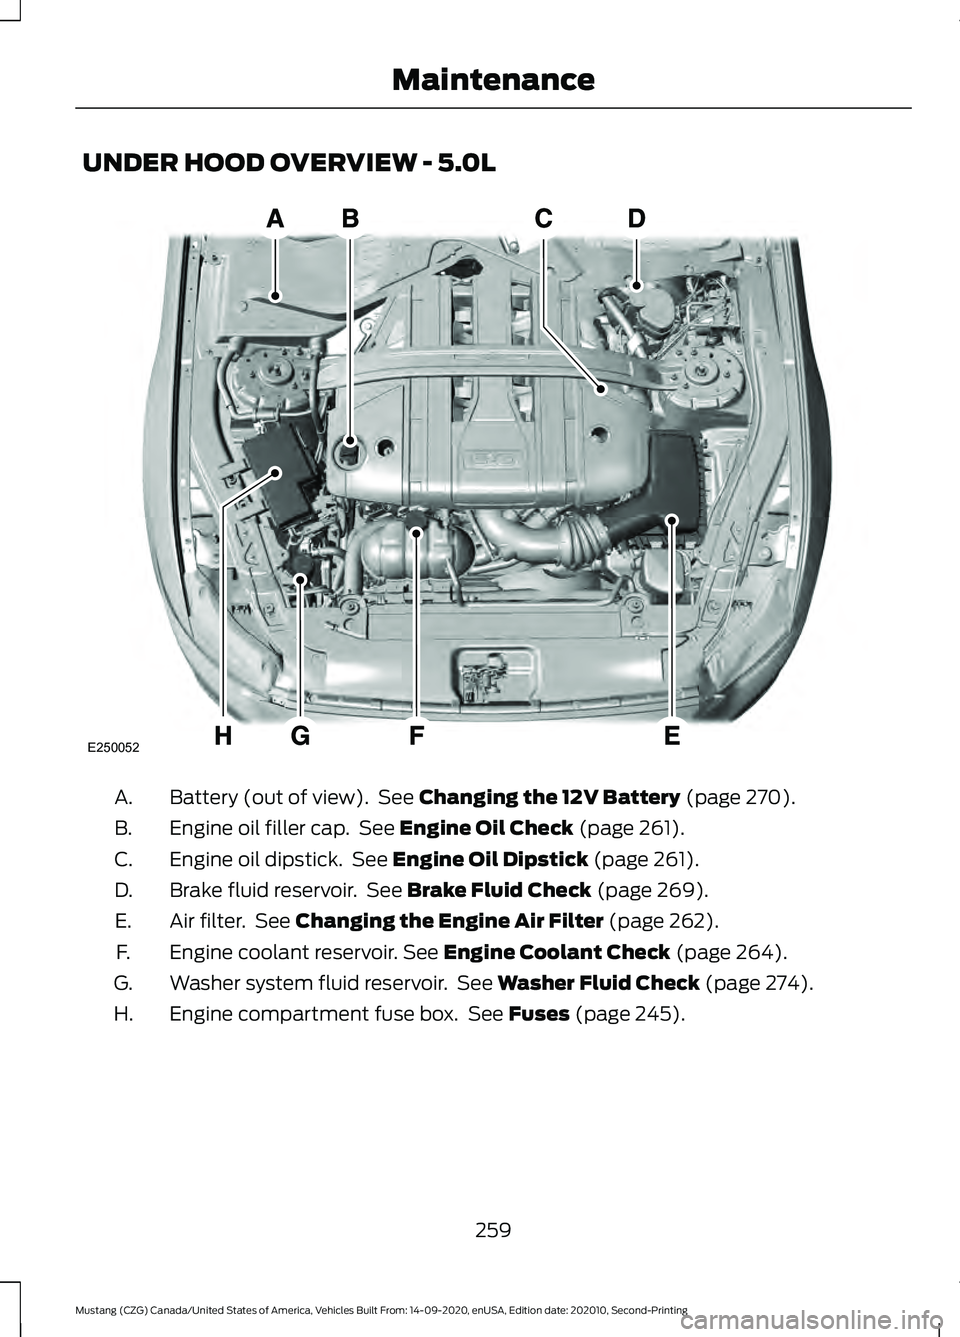 FORD MUSTANG 2021  Owners Manual UNDER HOOD OVERVIEW - 5.0L
Battery (out of view).  See Changing the 12V Battery (page 270).
A.
Engine oil filler cap.  See 
Engine Oil Check (page 261).
B.
Engine oil dipstick.  See 
Engine Oil Dipsti